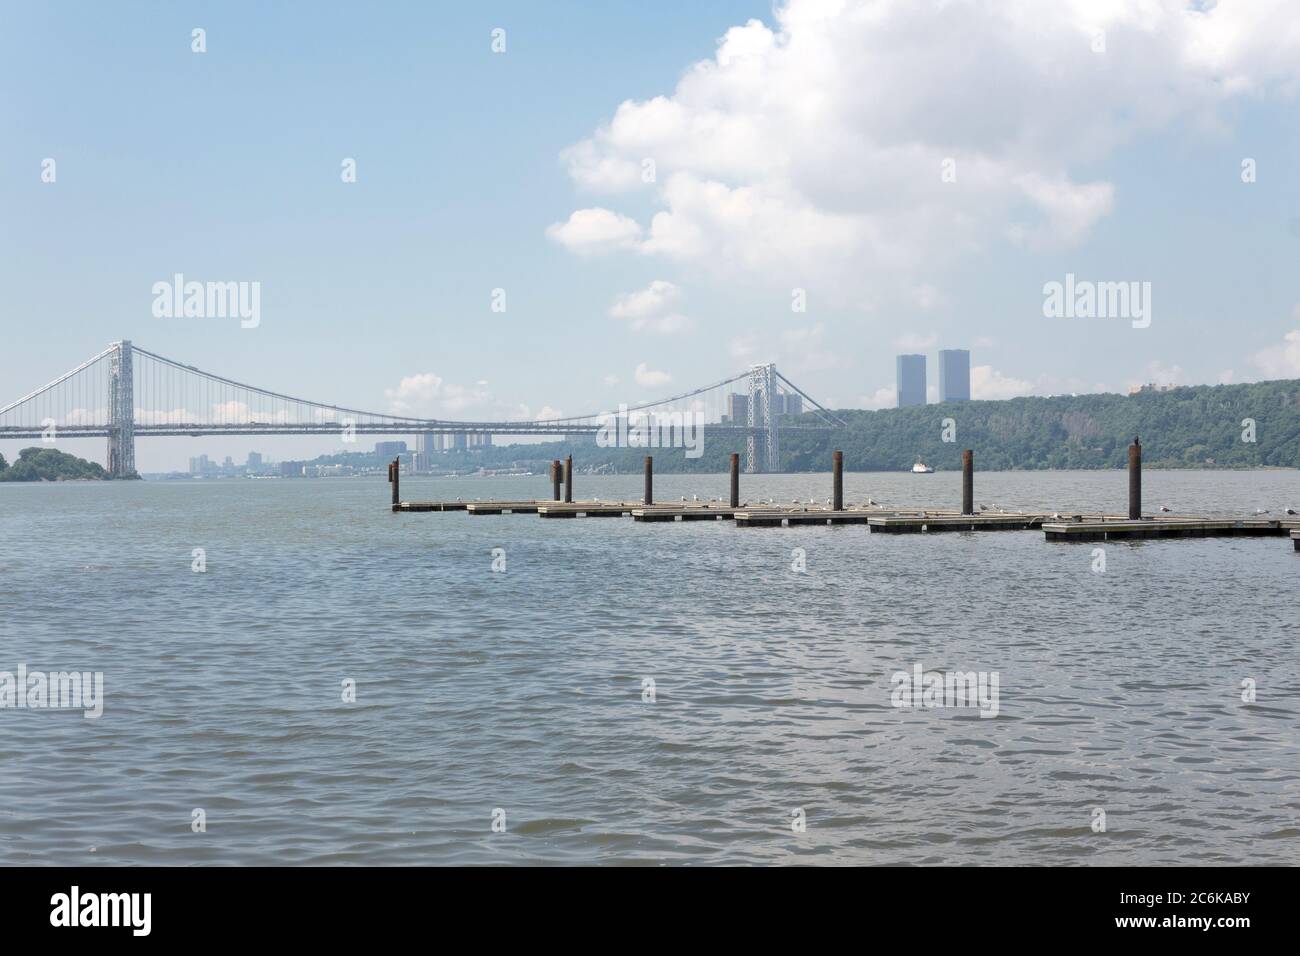 the George Washington Bridge from Manhattan side of the Hudson River with boat docks visible in the foreground Stock Photo